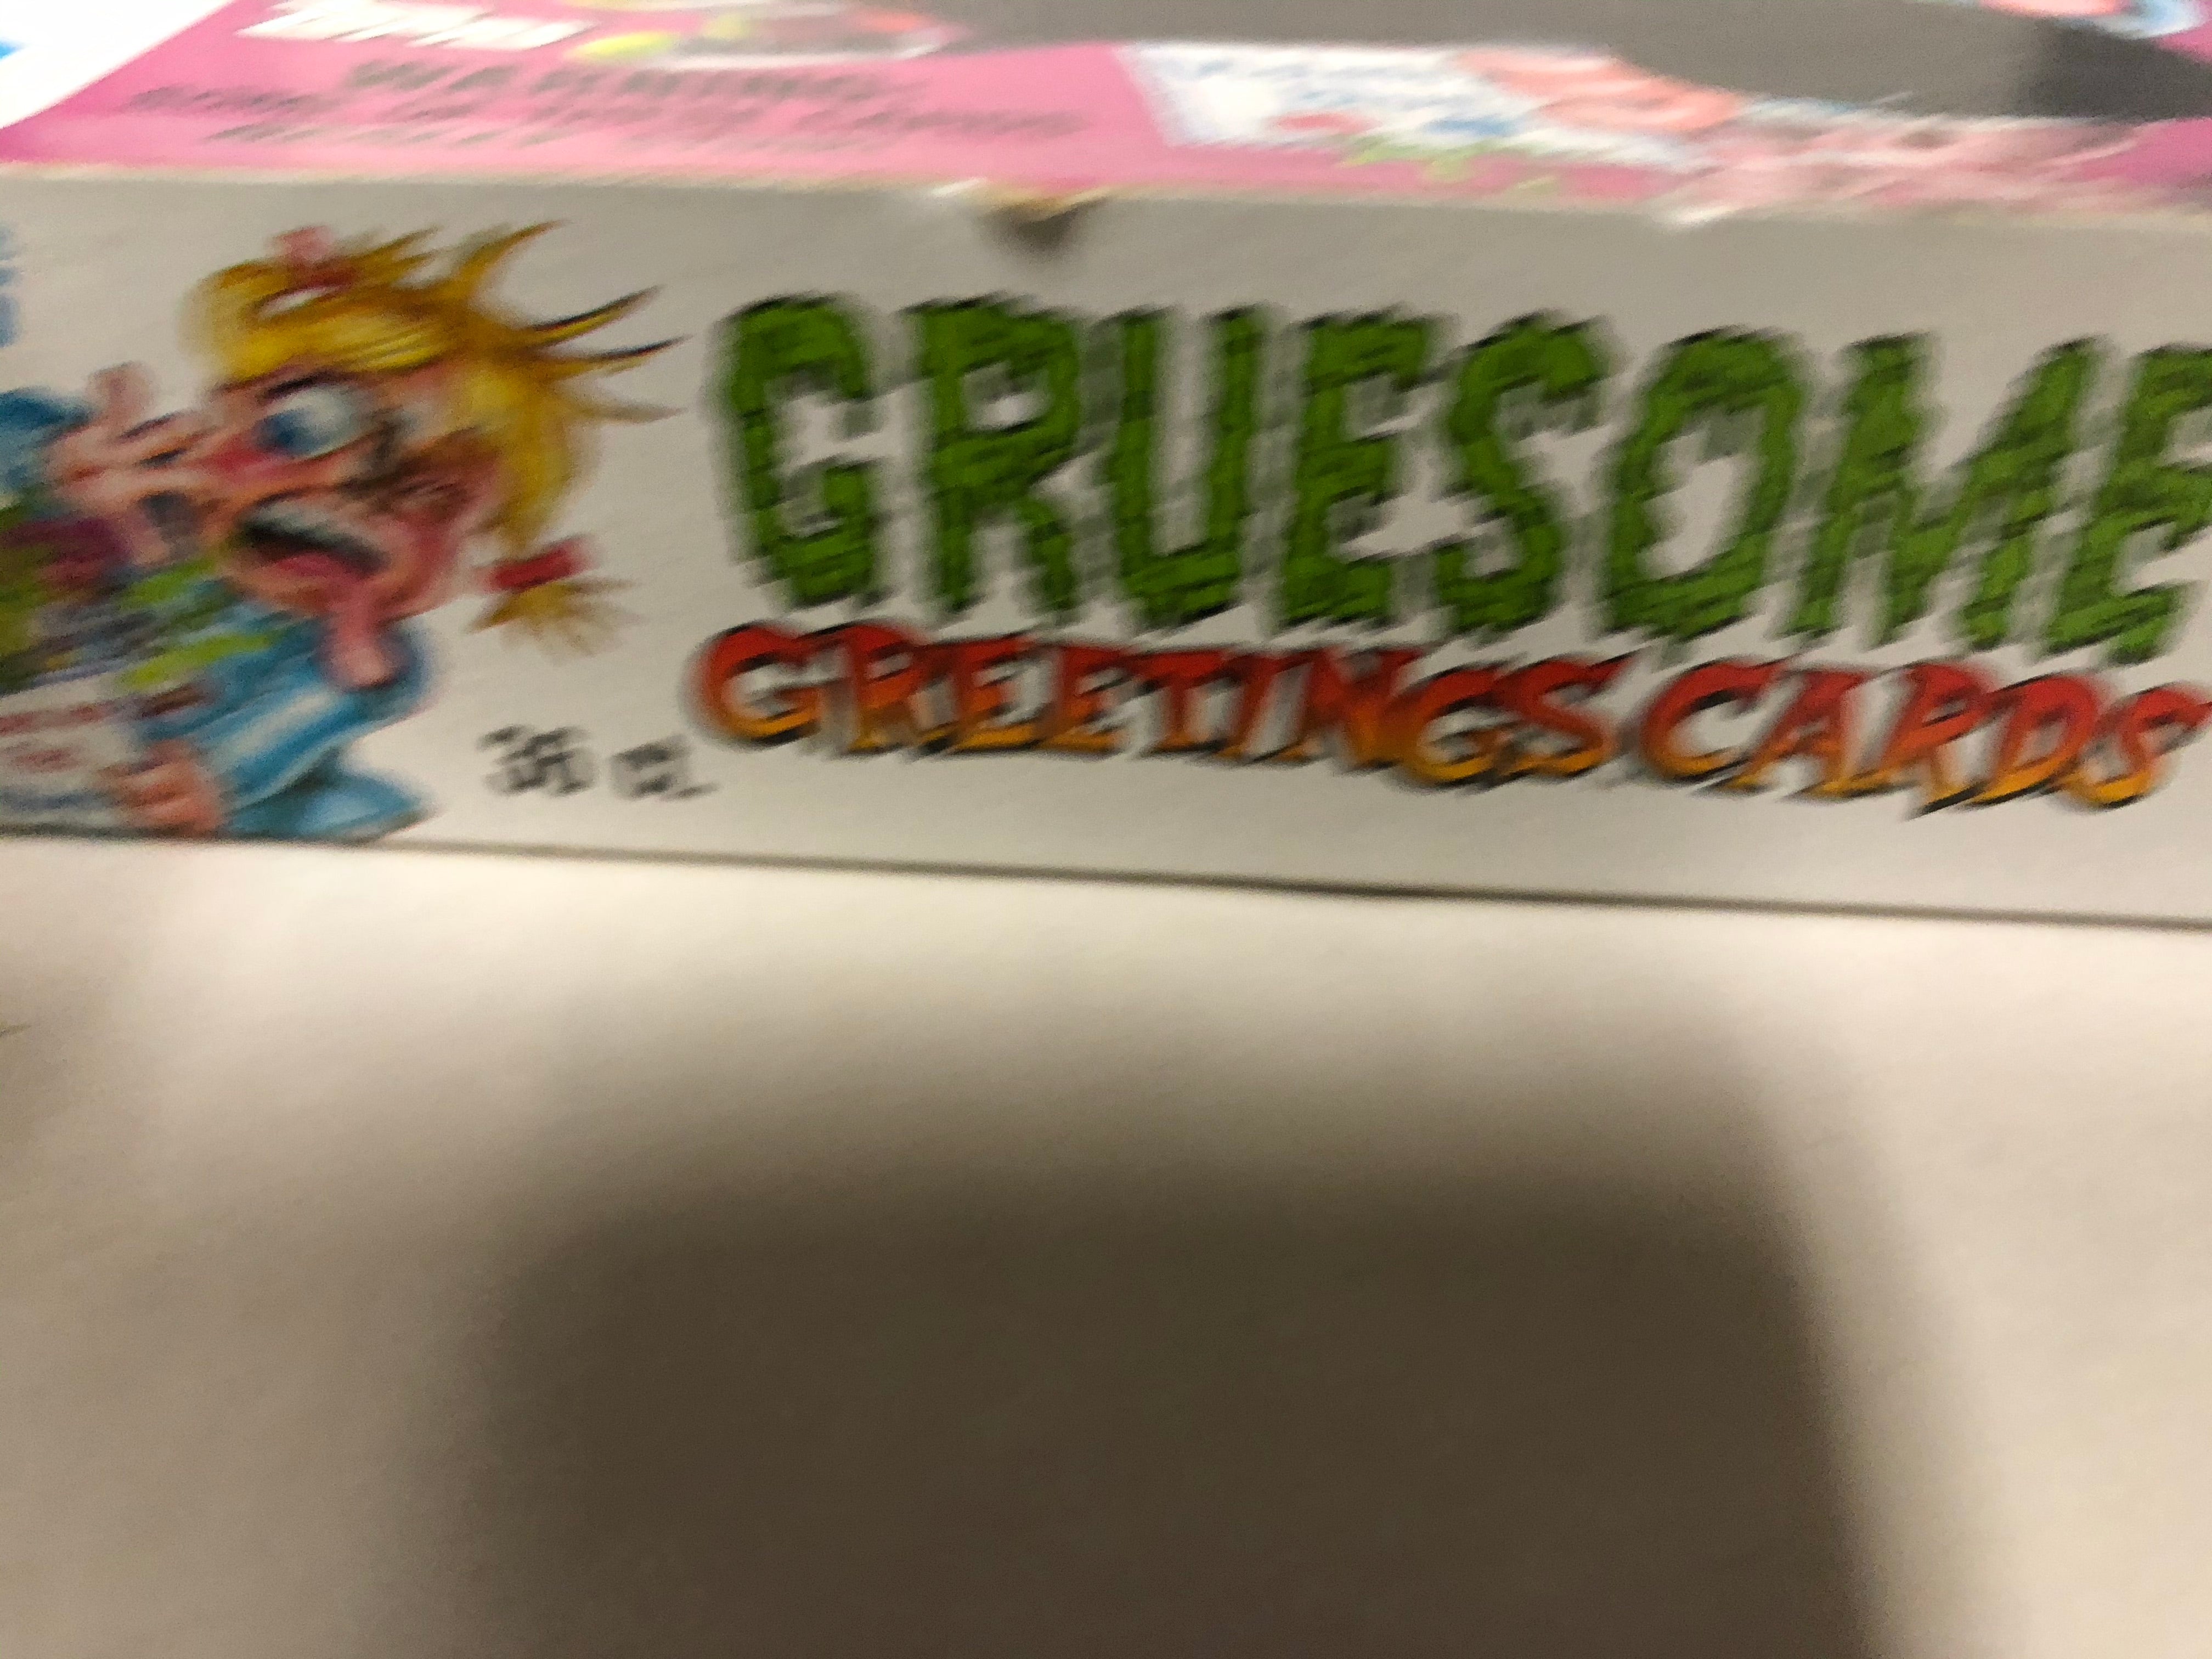 Gruesome Greeting cards 36 packs box 1992